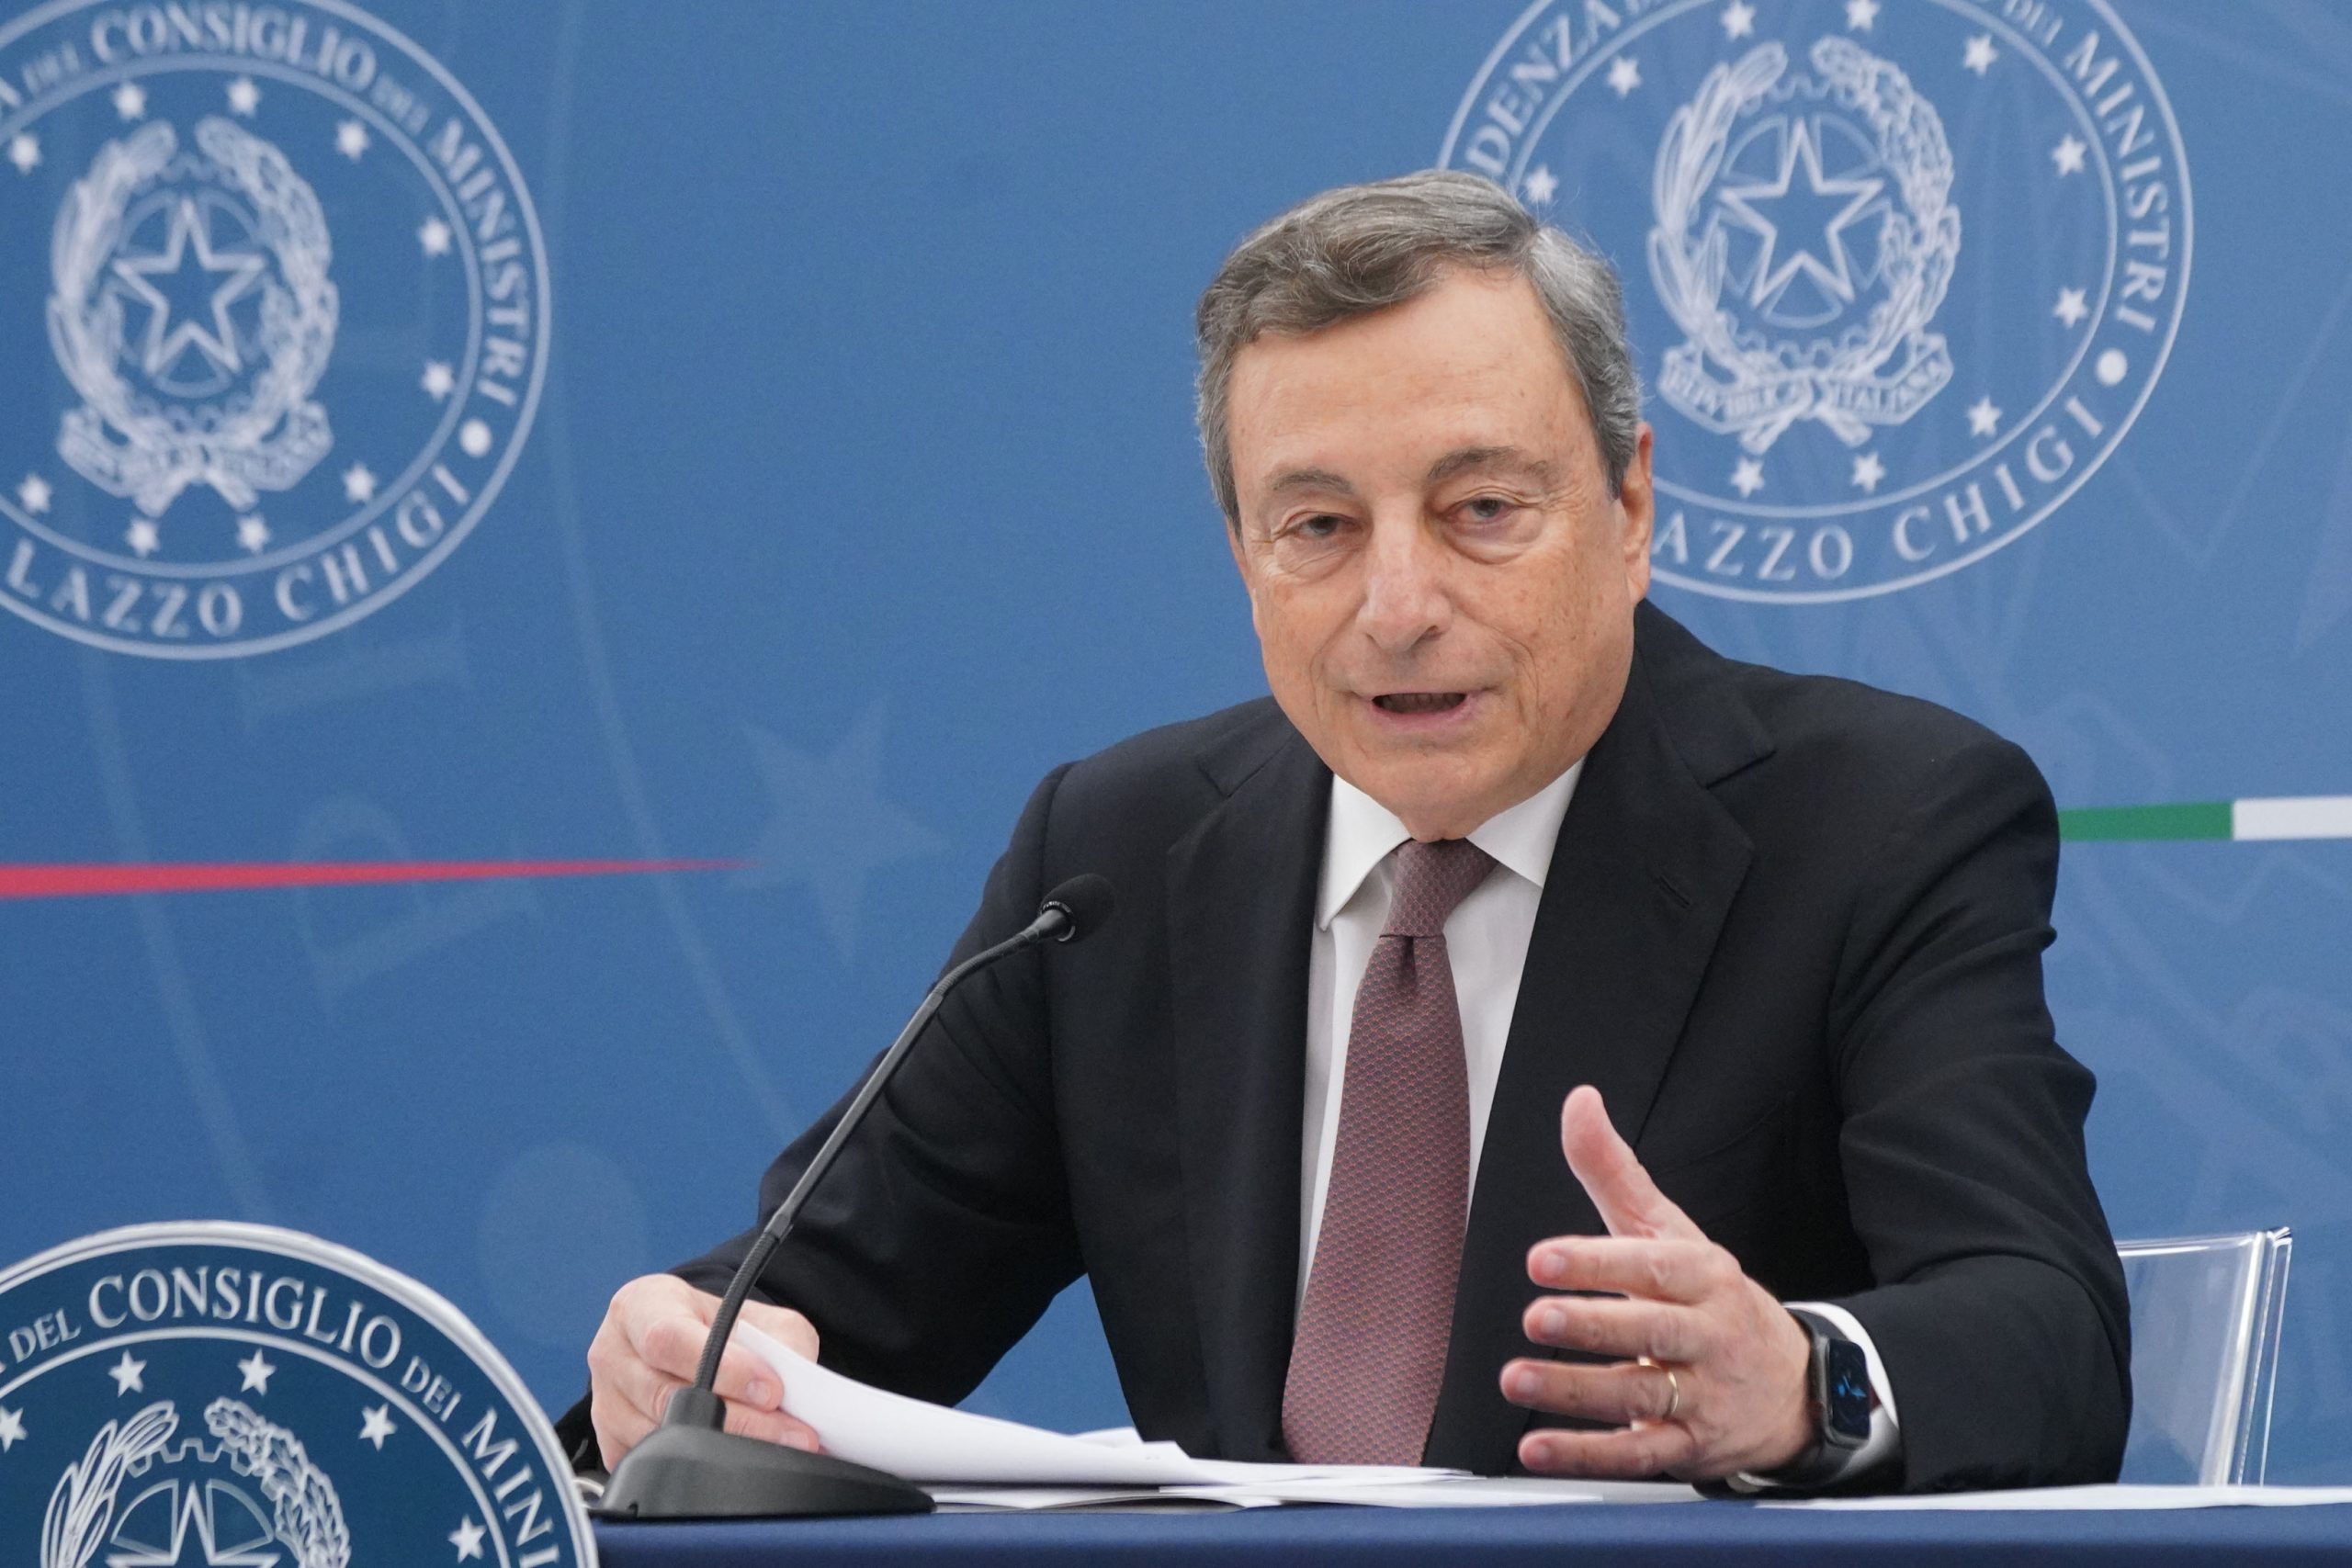 G20 on Afghanistan will be held on October 12, says Draghi